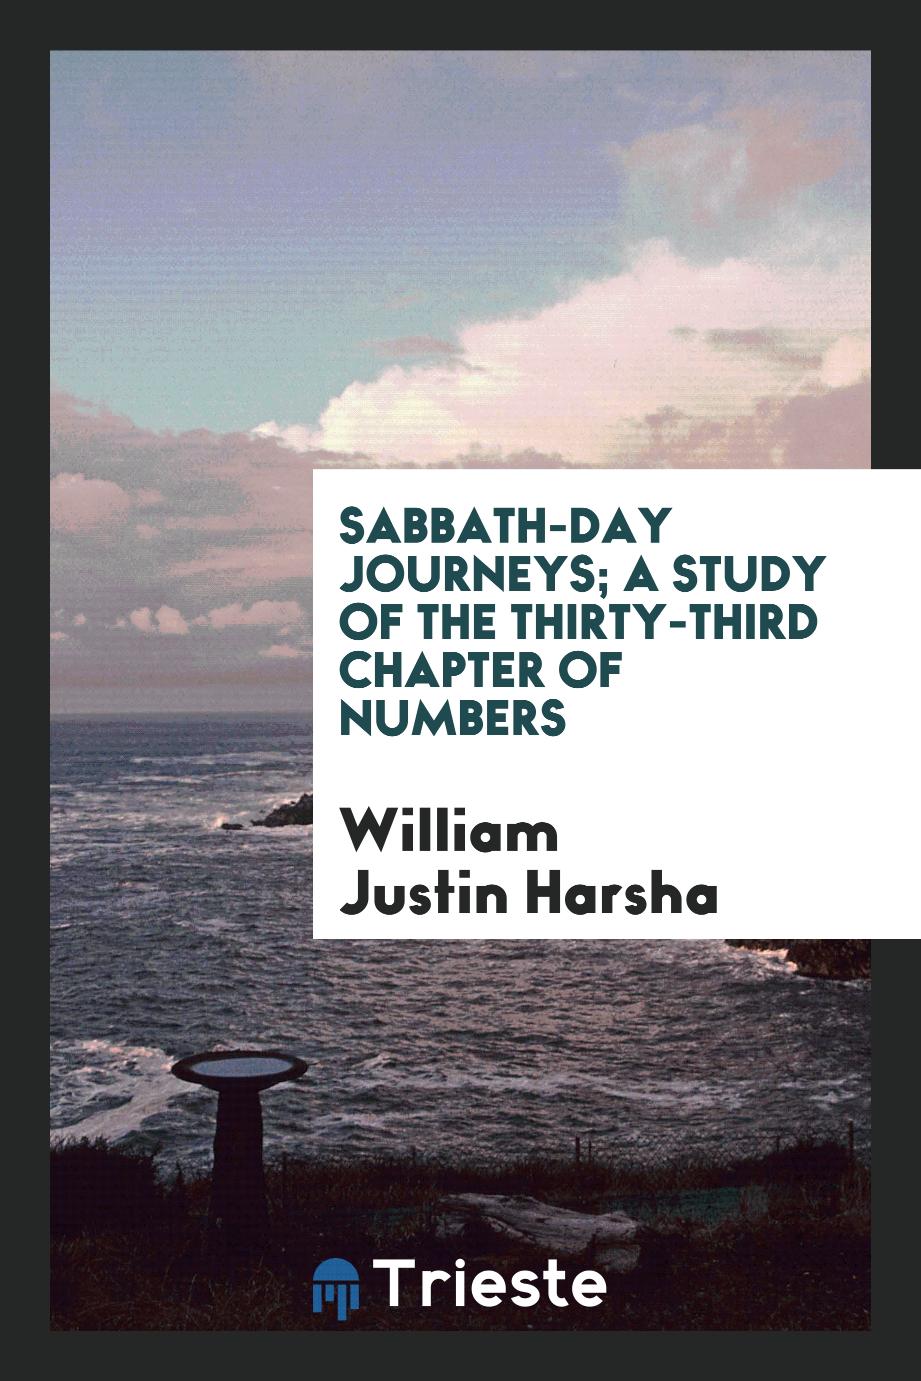 Sabbath-day journeys; a study of the thirty-third chapter of Numbers